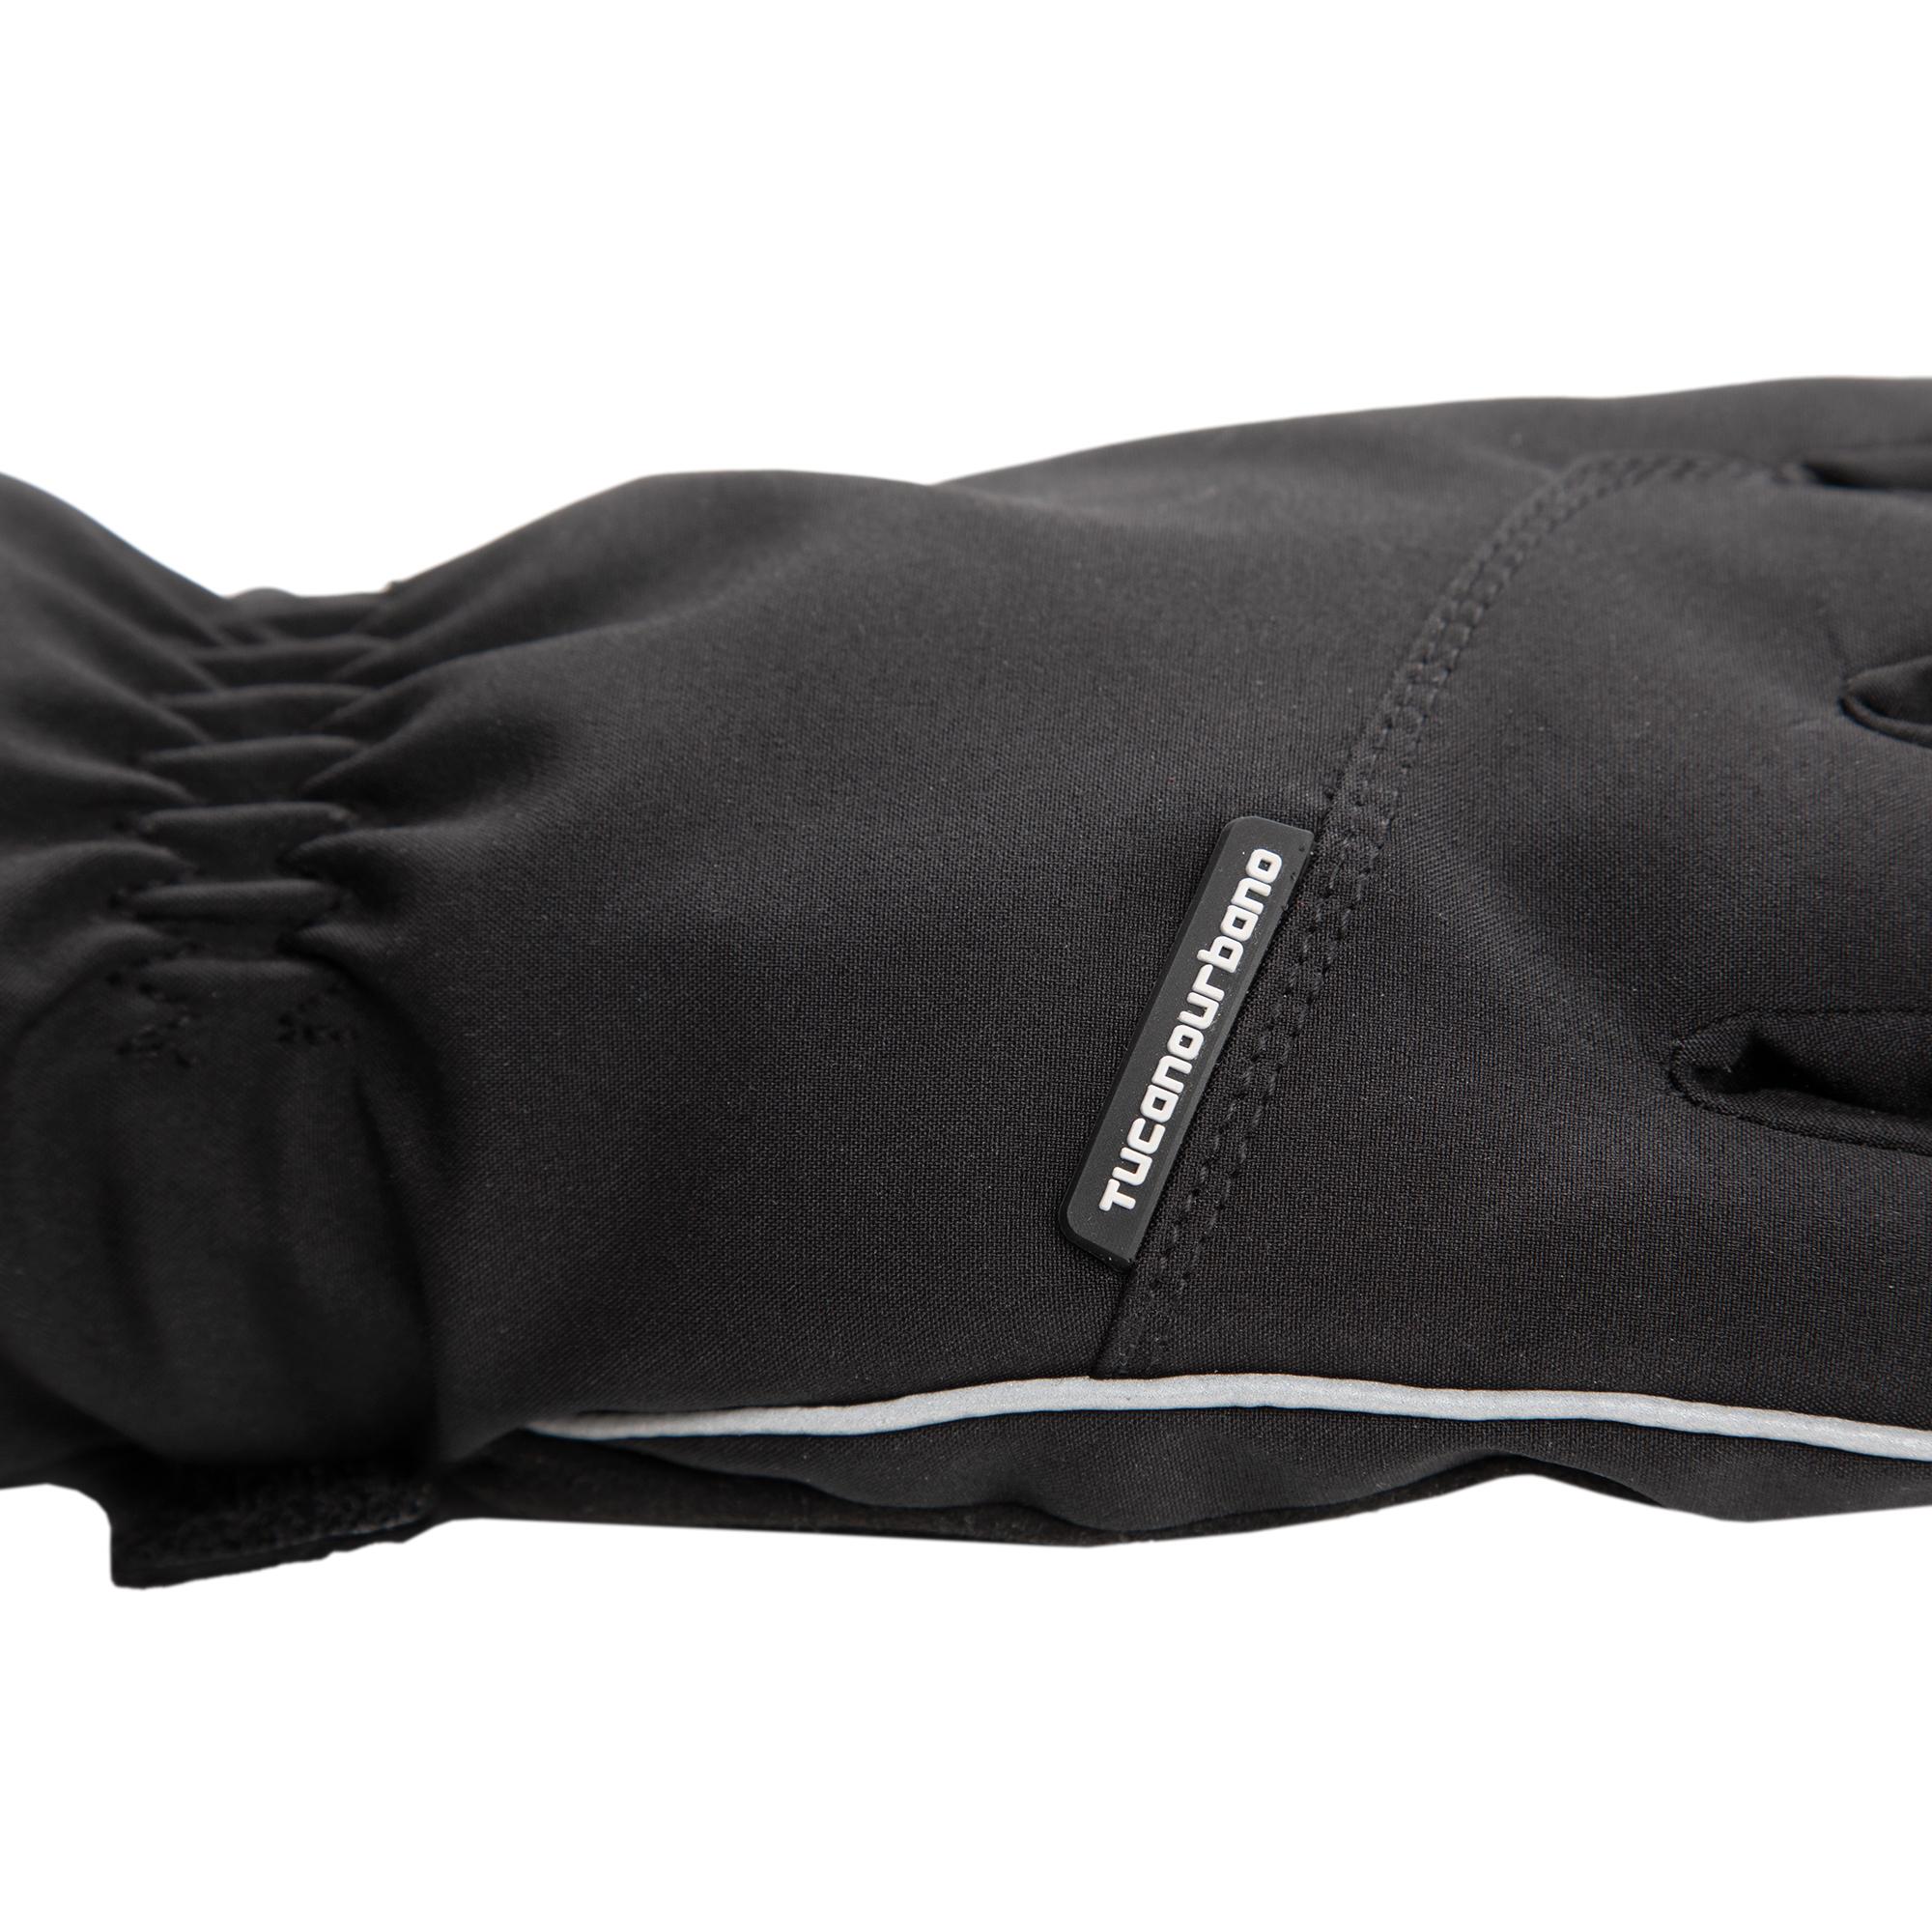 guantes calefactable Feelwarm